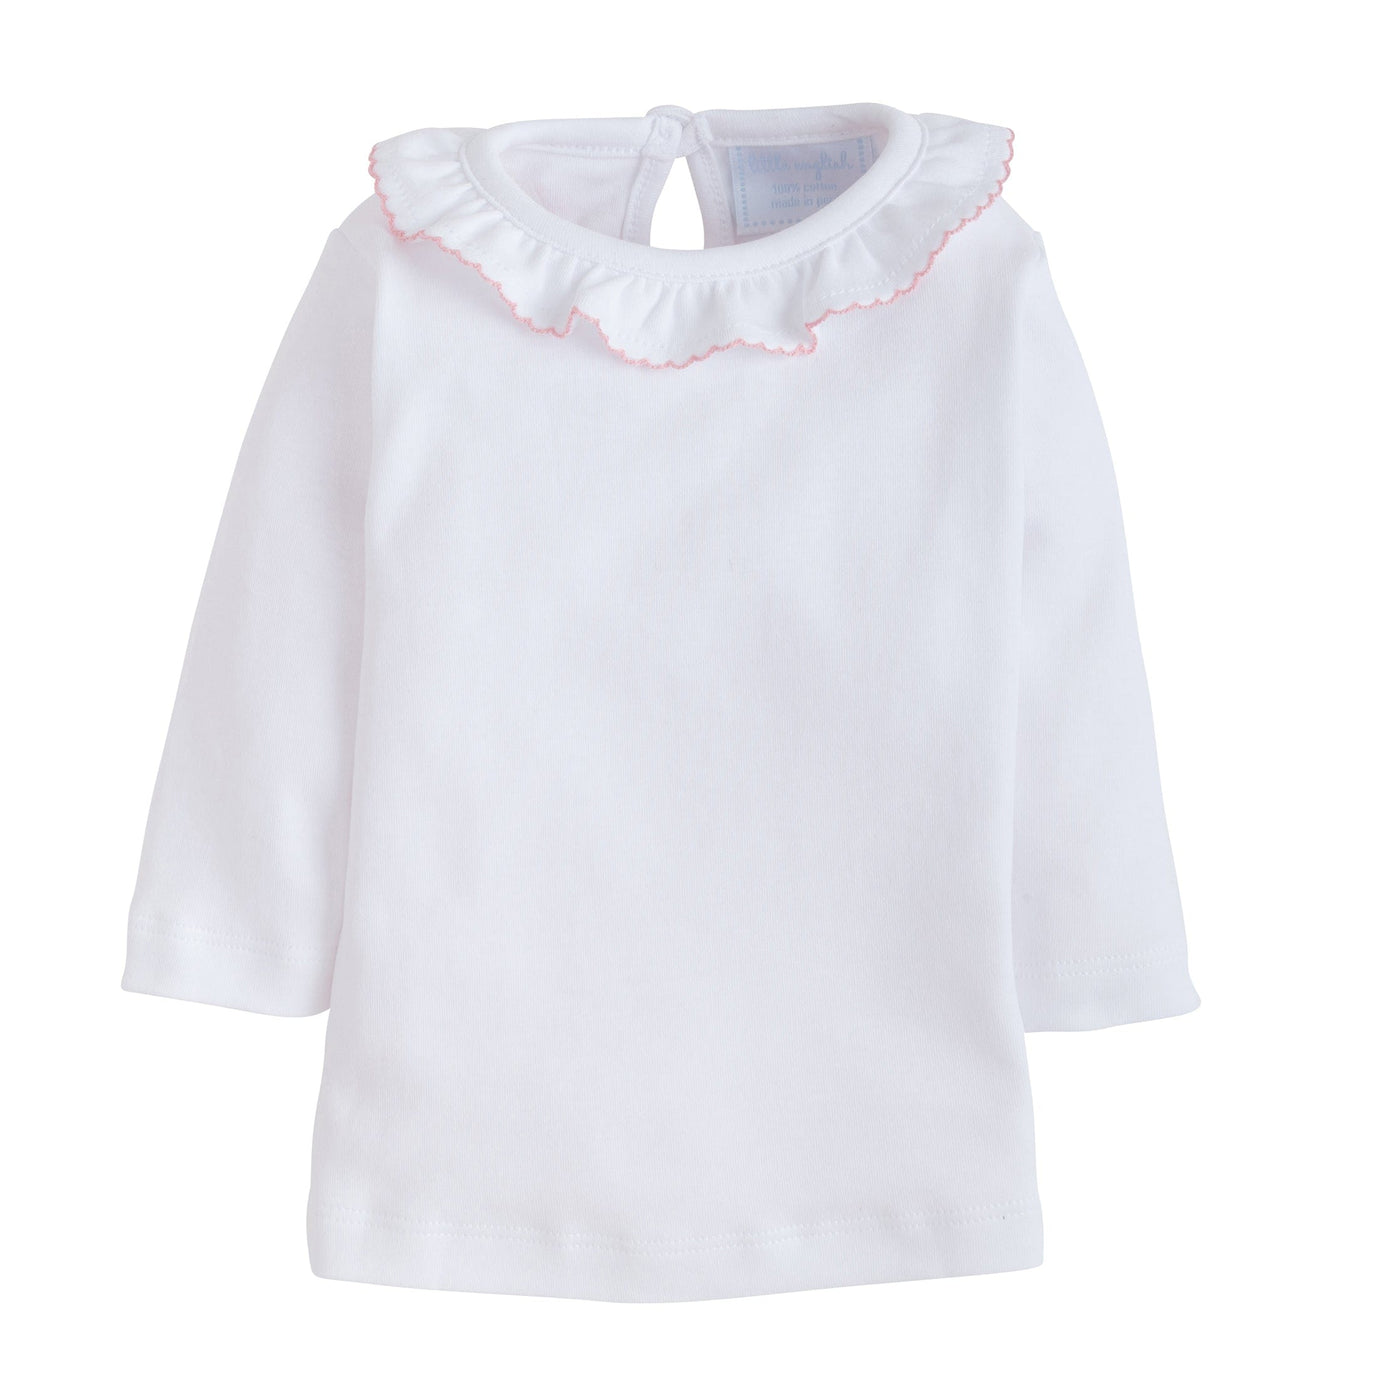 seguridadindustrialcr classic childrens clothing girls white blouse with ruffled collar and pink trim picot